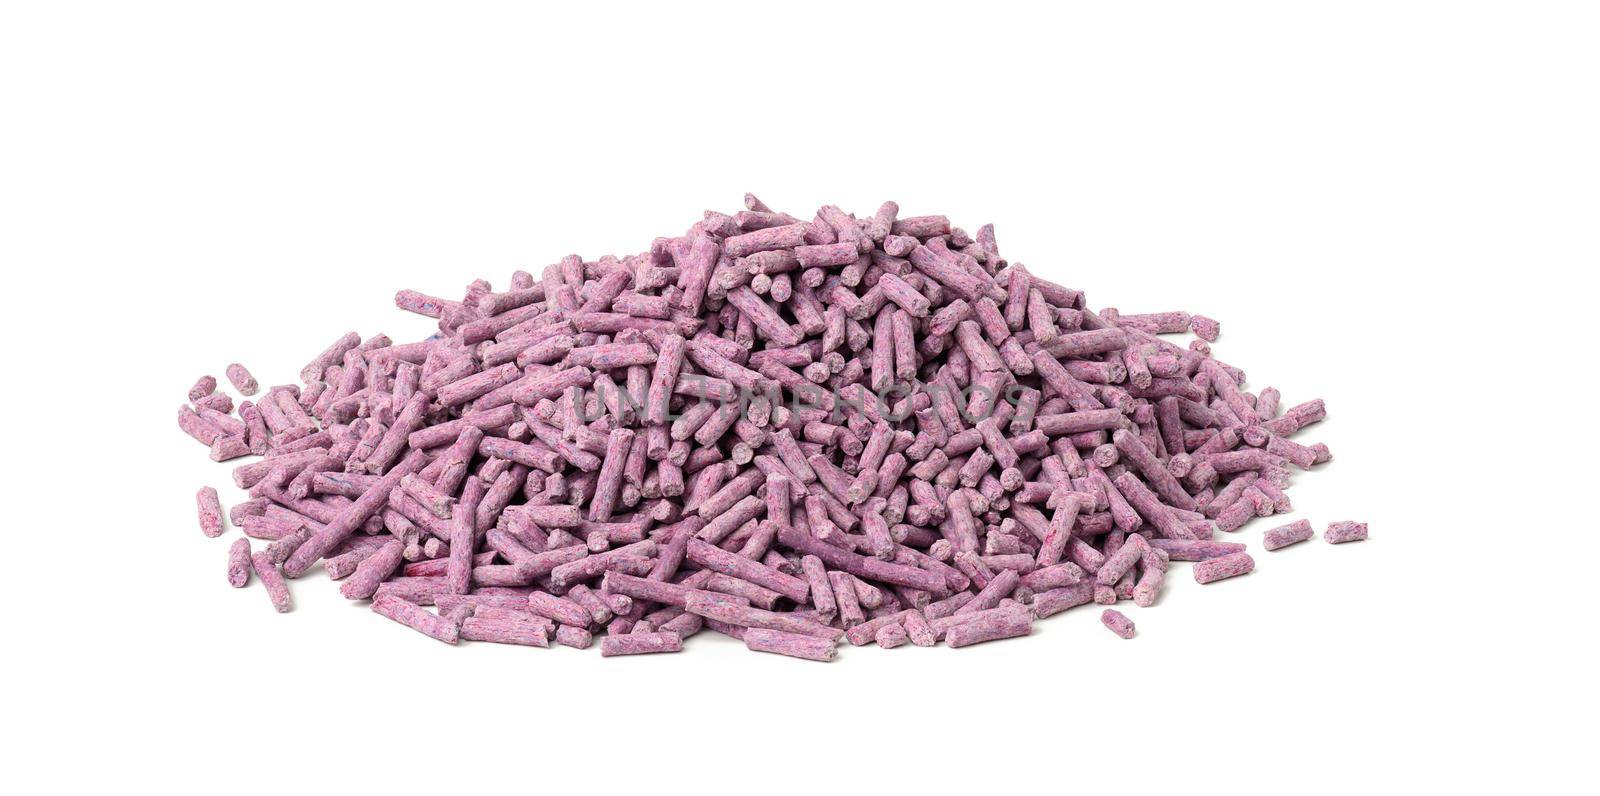 pile of pressed purple cat litter isolated on white background. Granules with lavender scent by ndanko